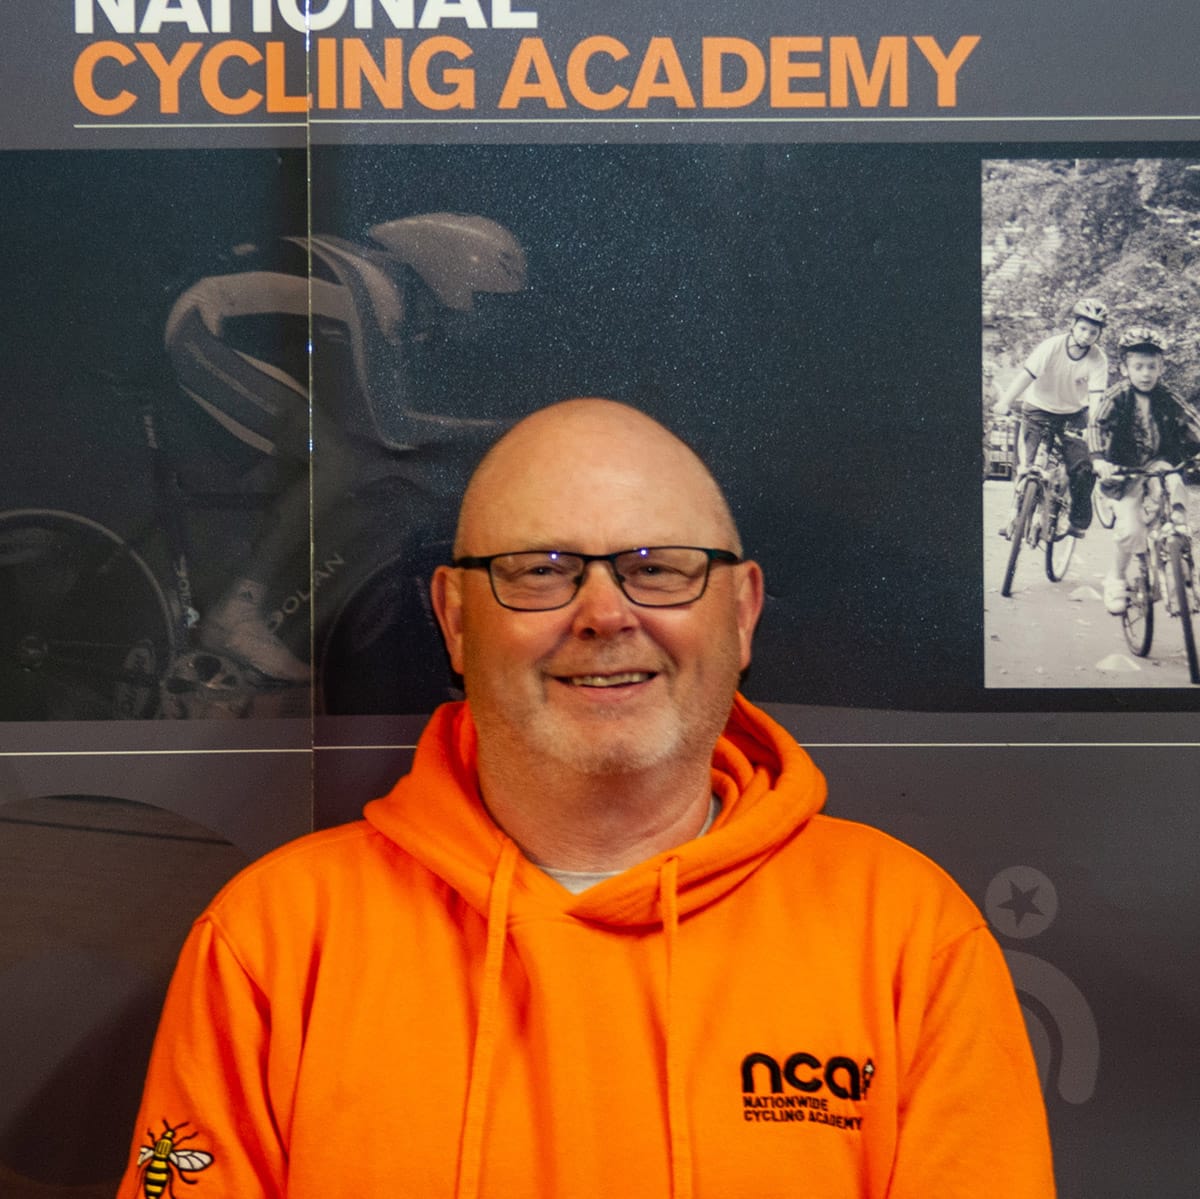 About NCA - Pete Staley